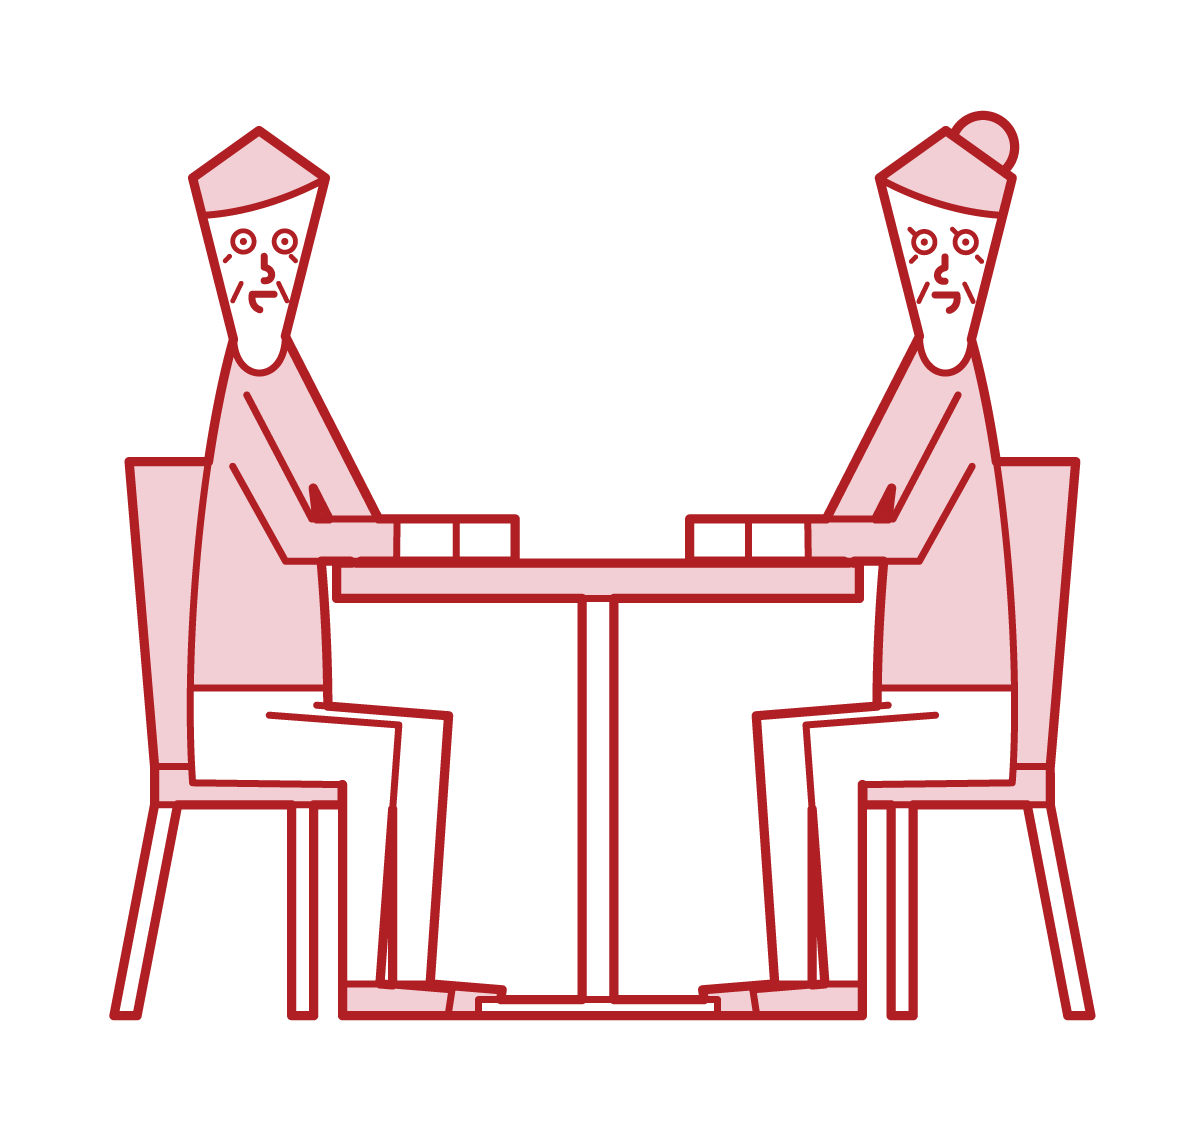 Illustration of an elderly couple sitting down and talking